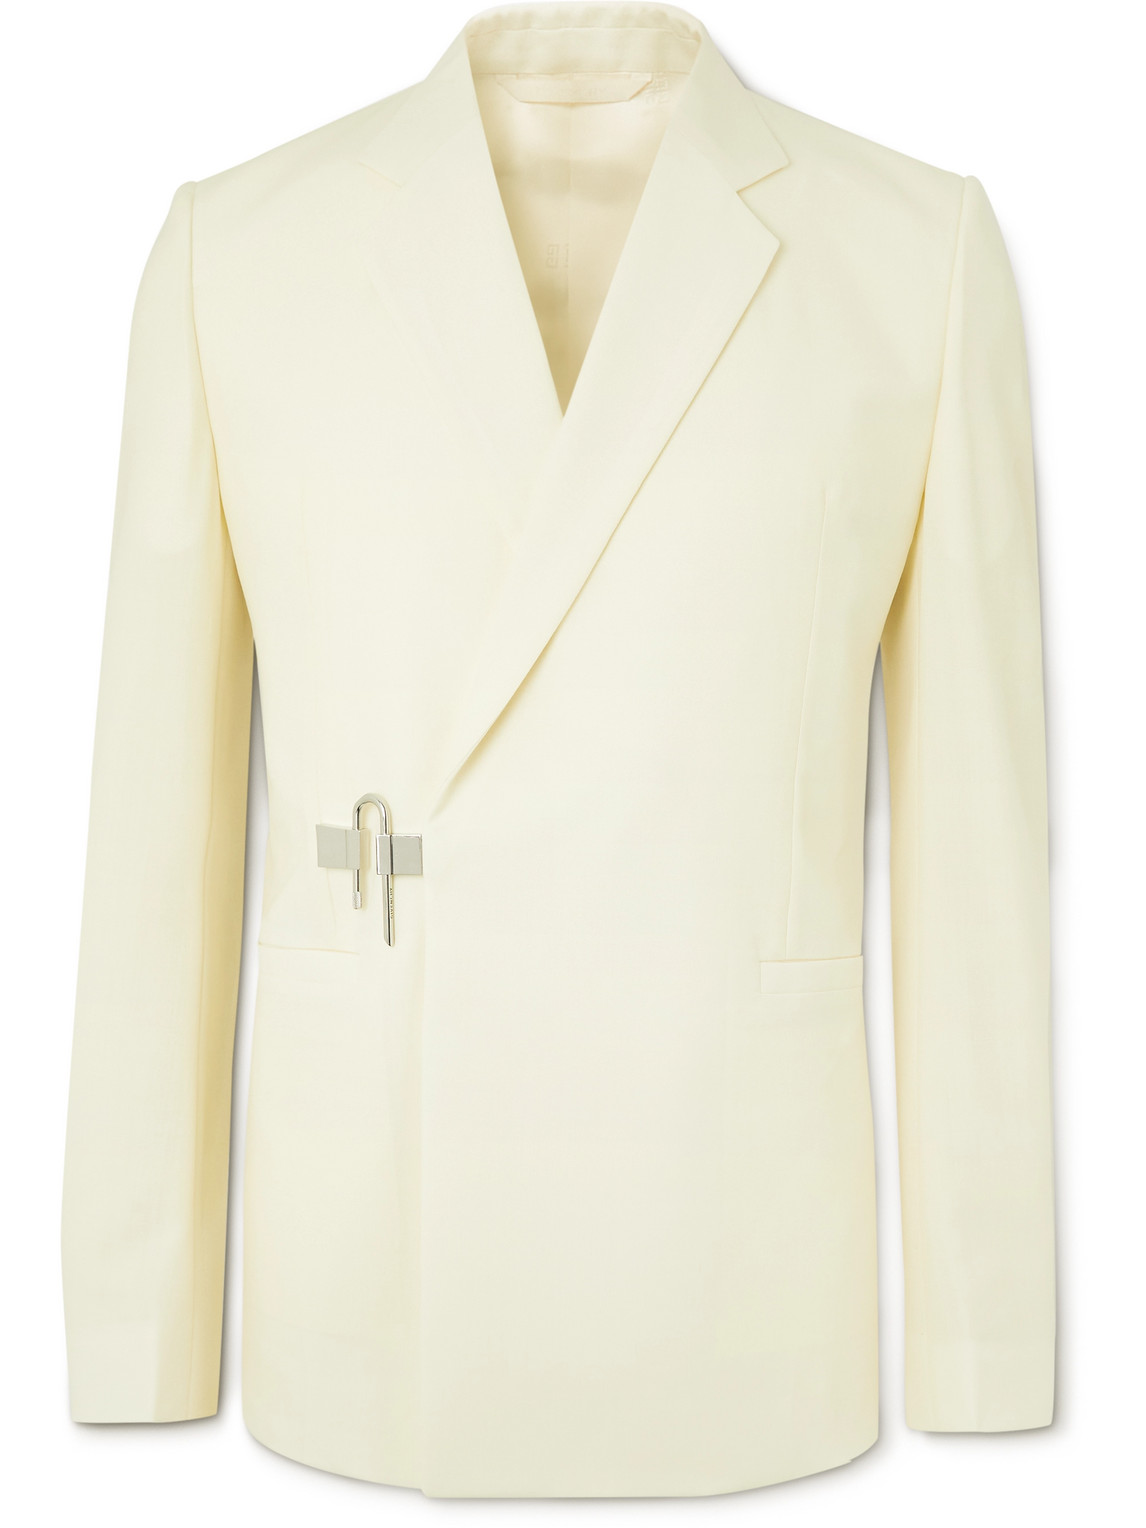 GIVENCHY SLIM-FIT WOOL AND MOHAIR-BLEND BLAZER